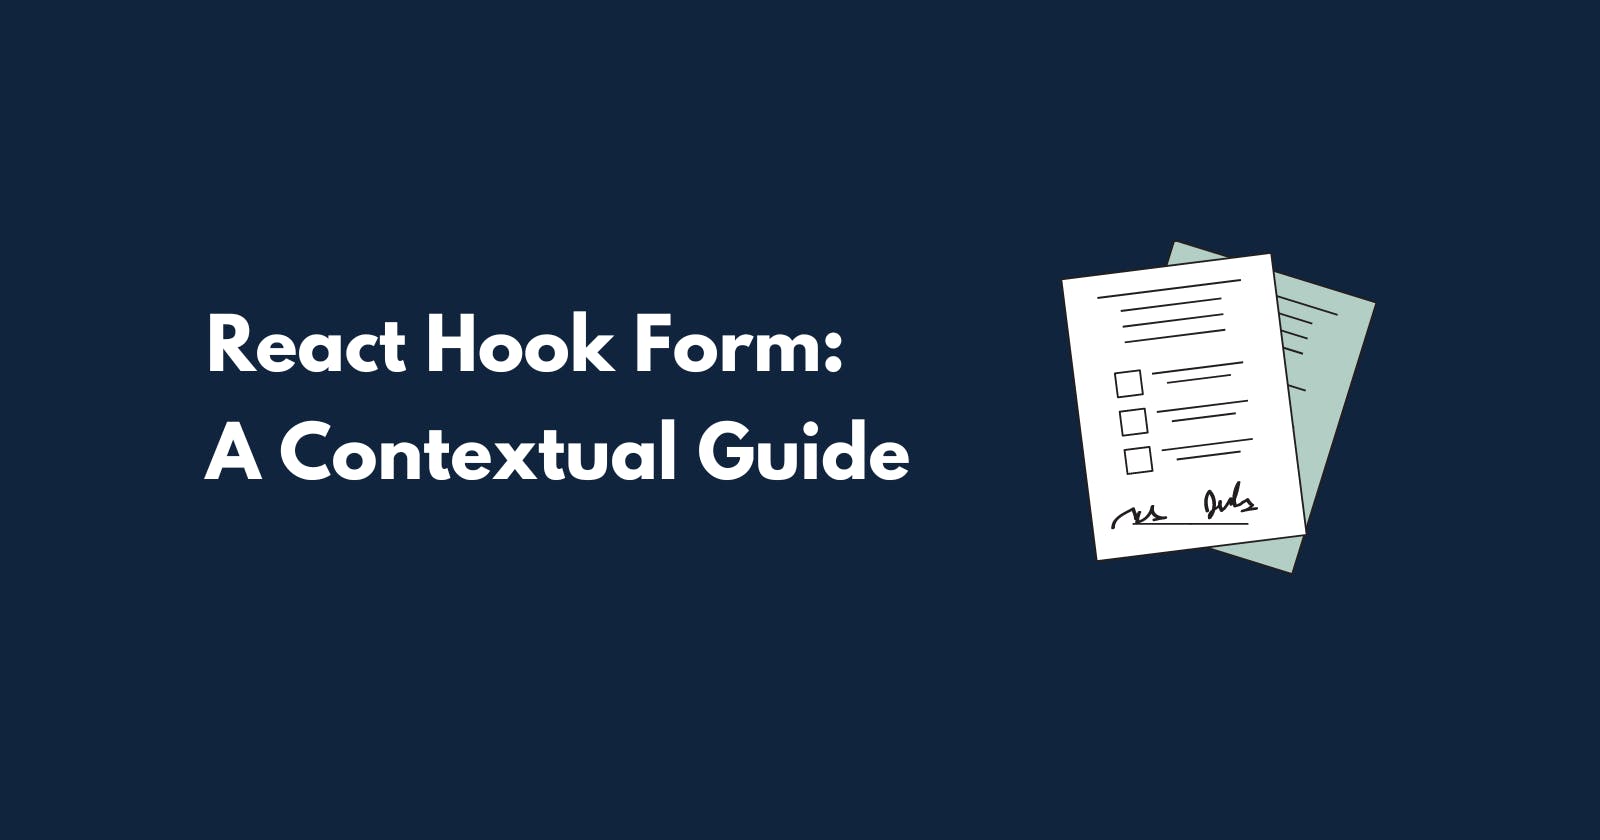 React Hook Form: A Contextual Guide for Beginners